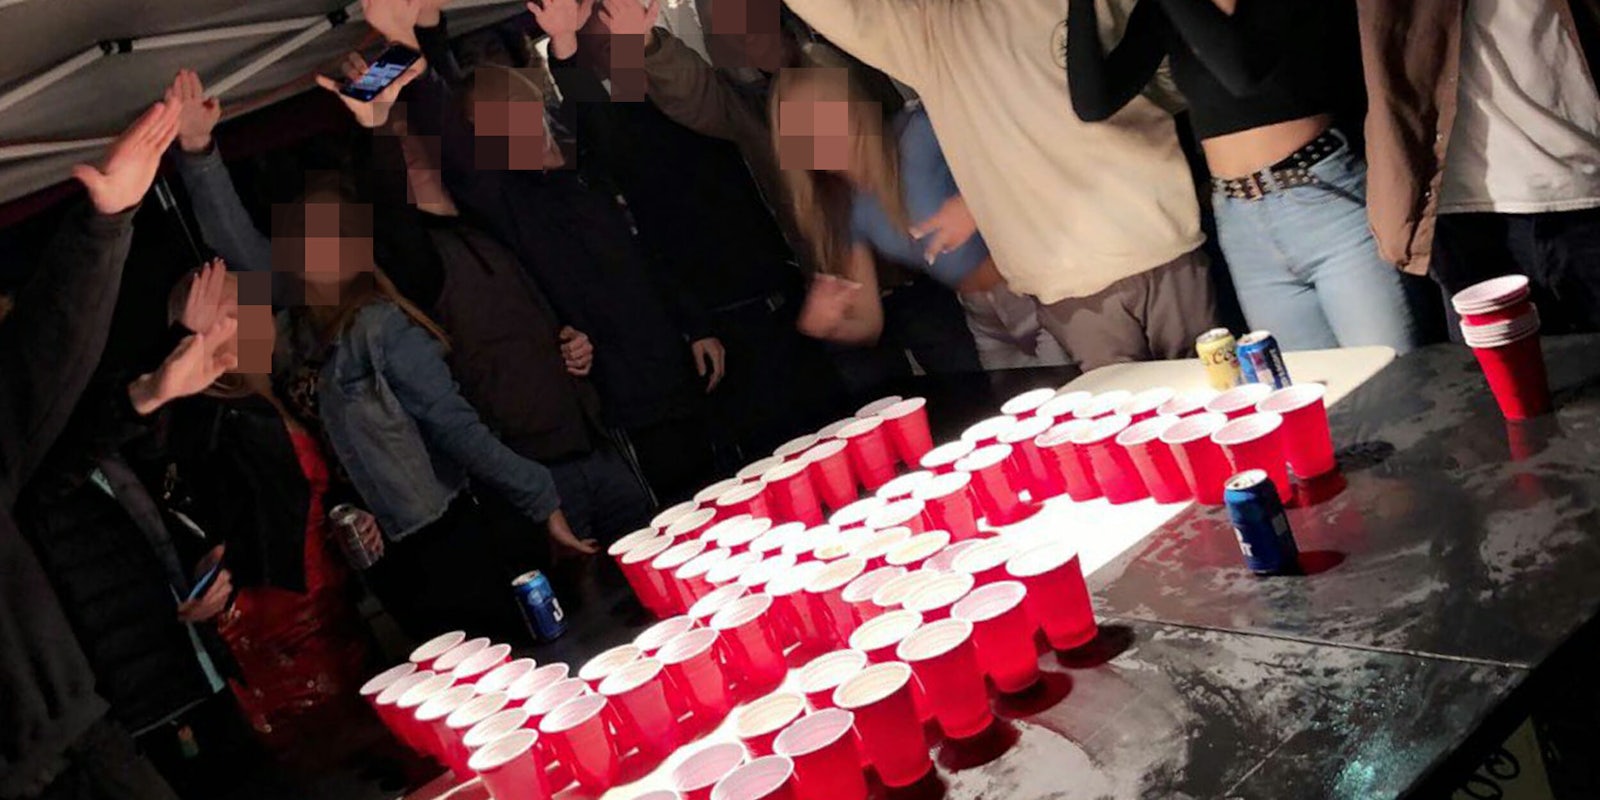 swastika red cups